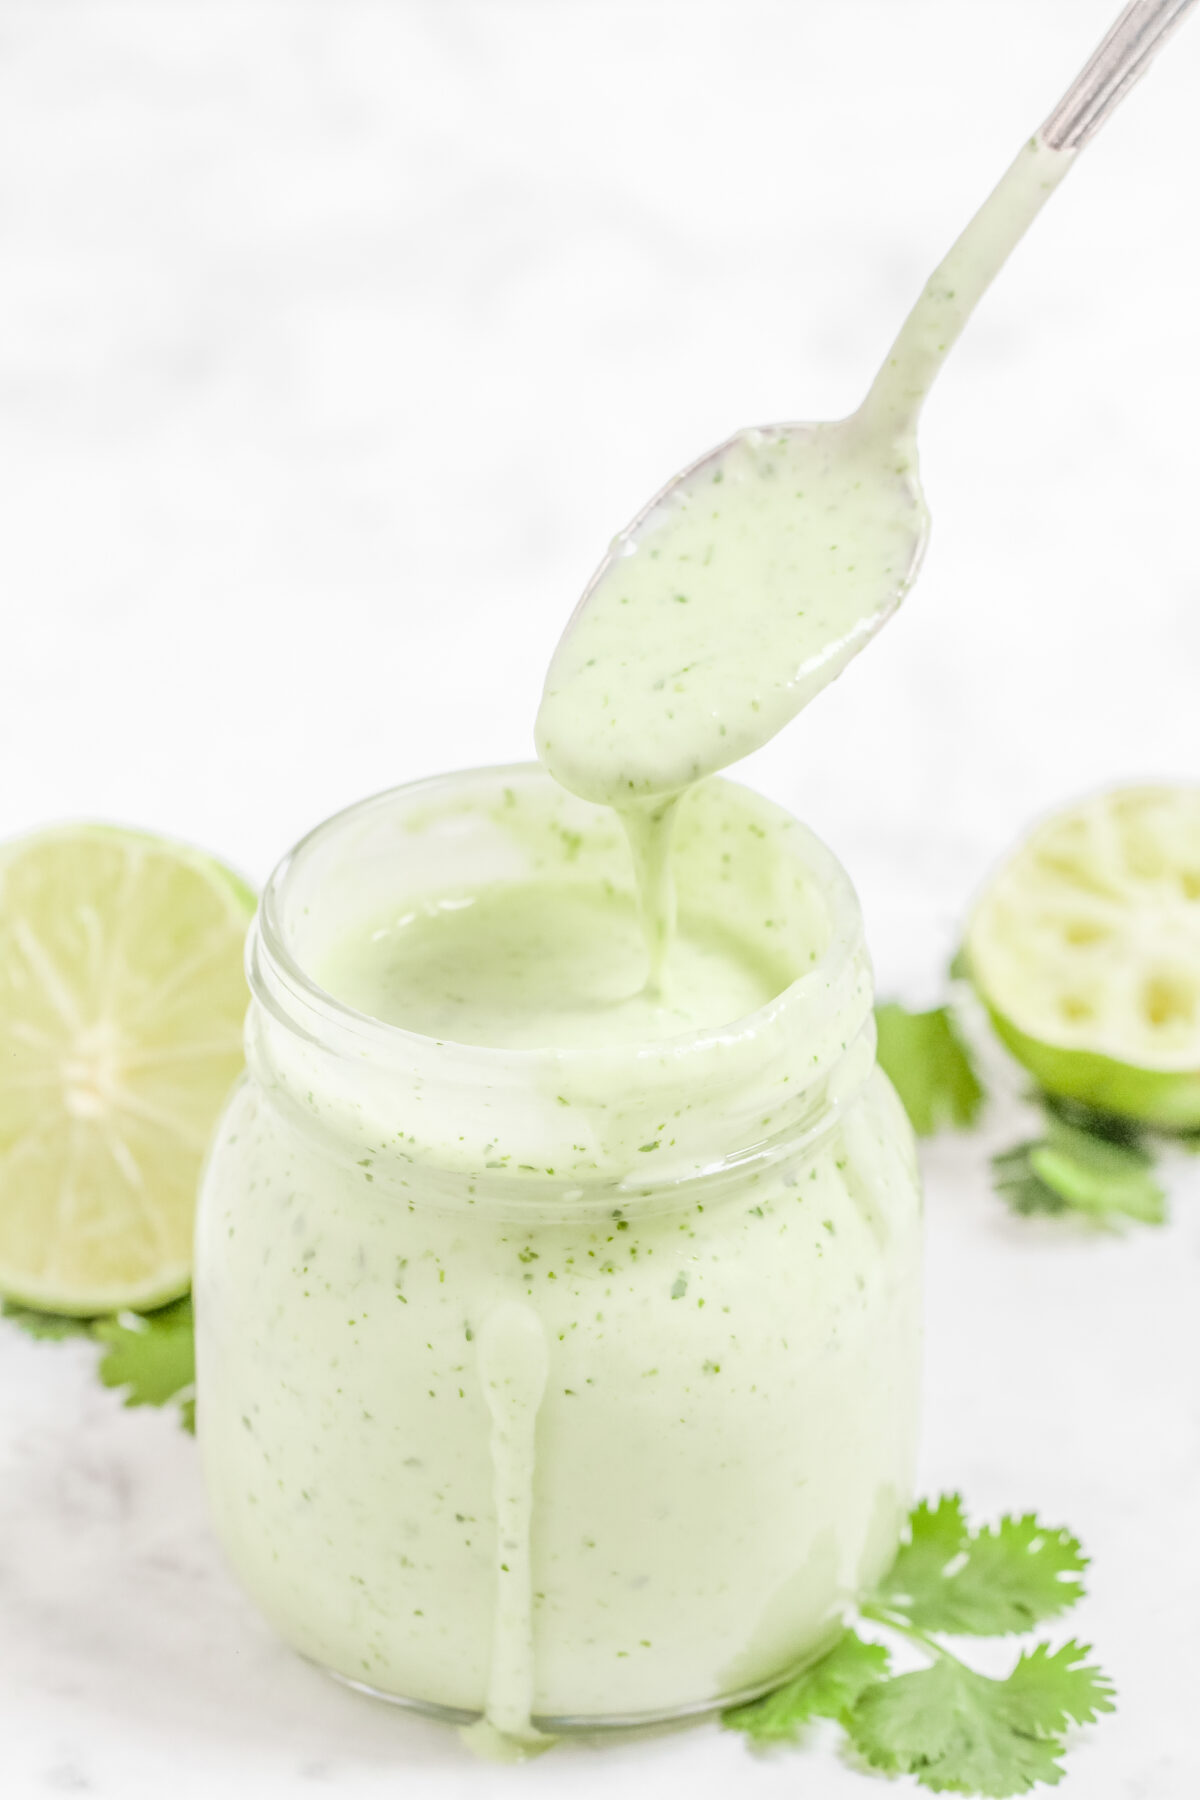 This creamy cilantro lime dressing recipe goes great on salads, grilled chicken, tacos or anything else that needs a little Mexican flair.